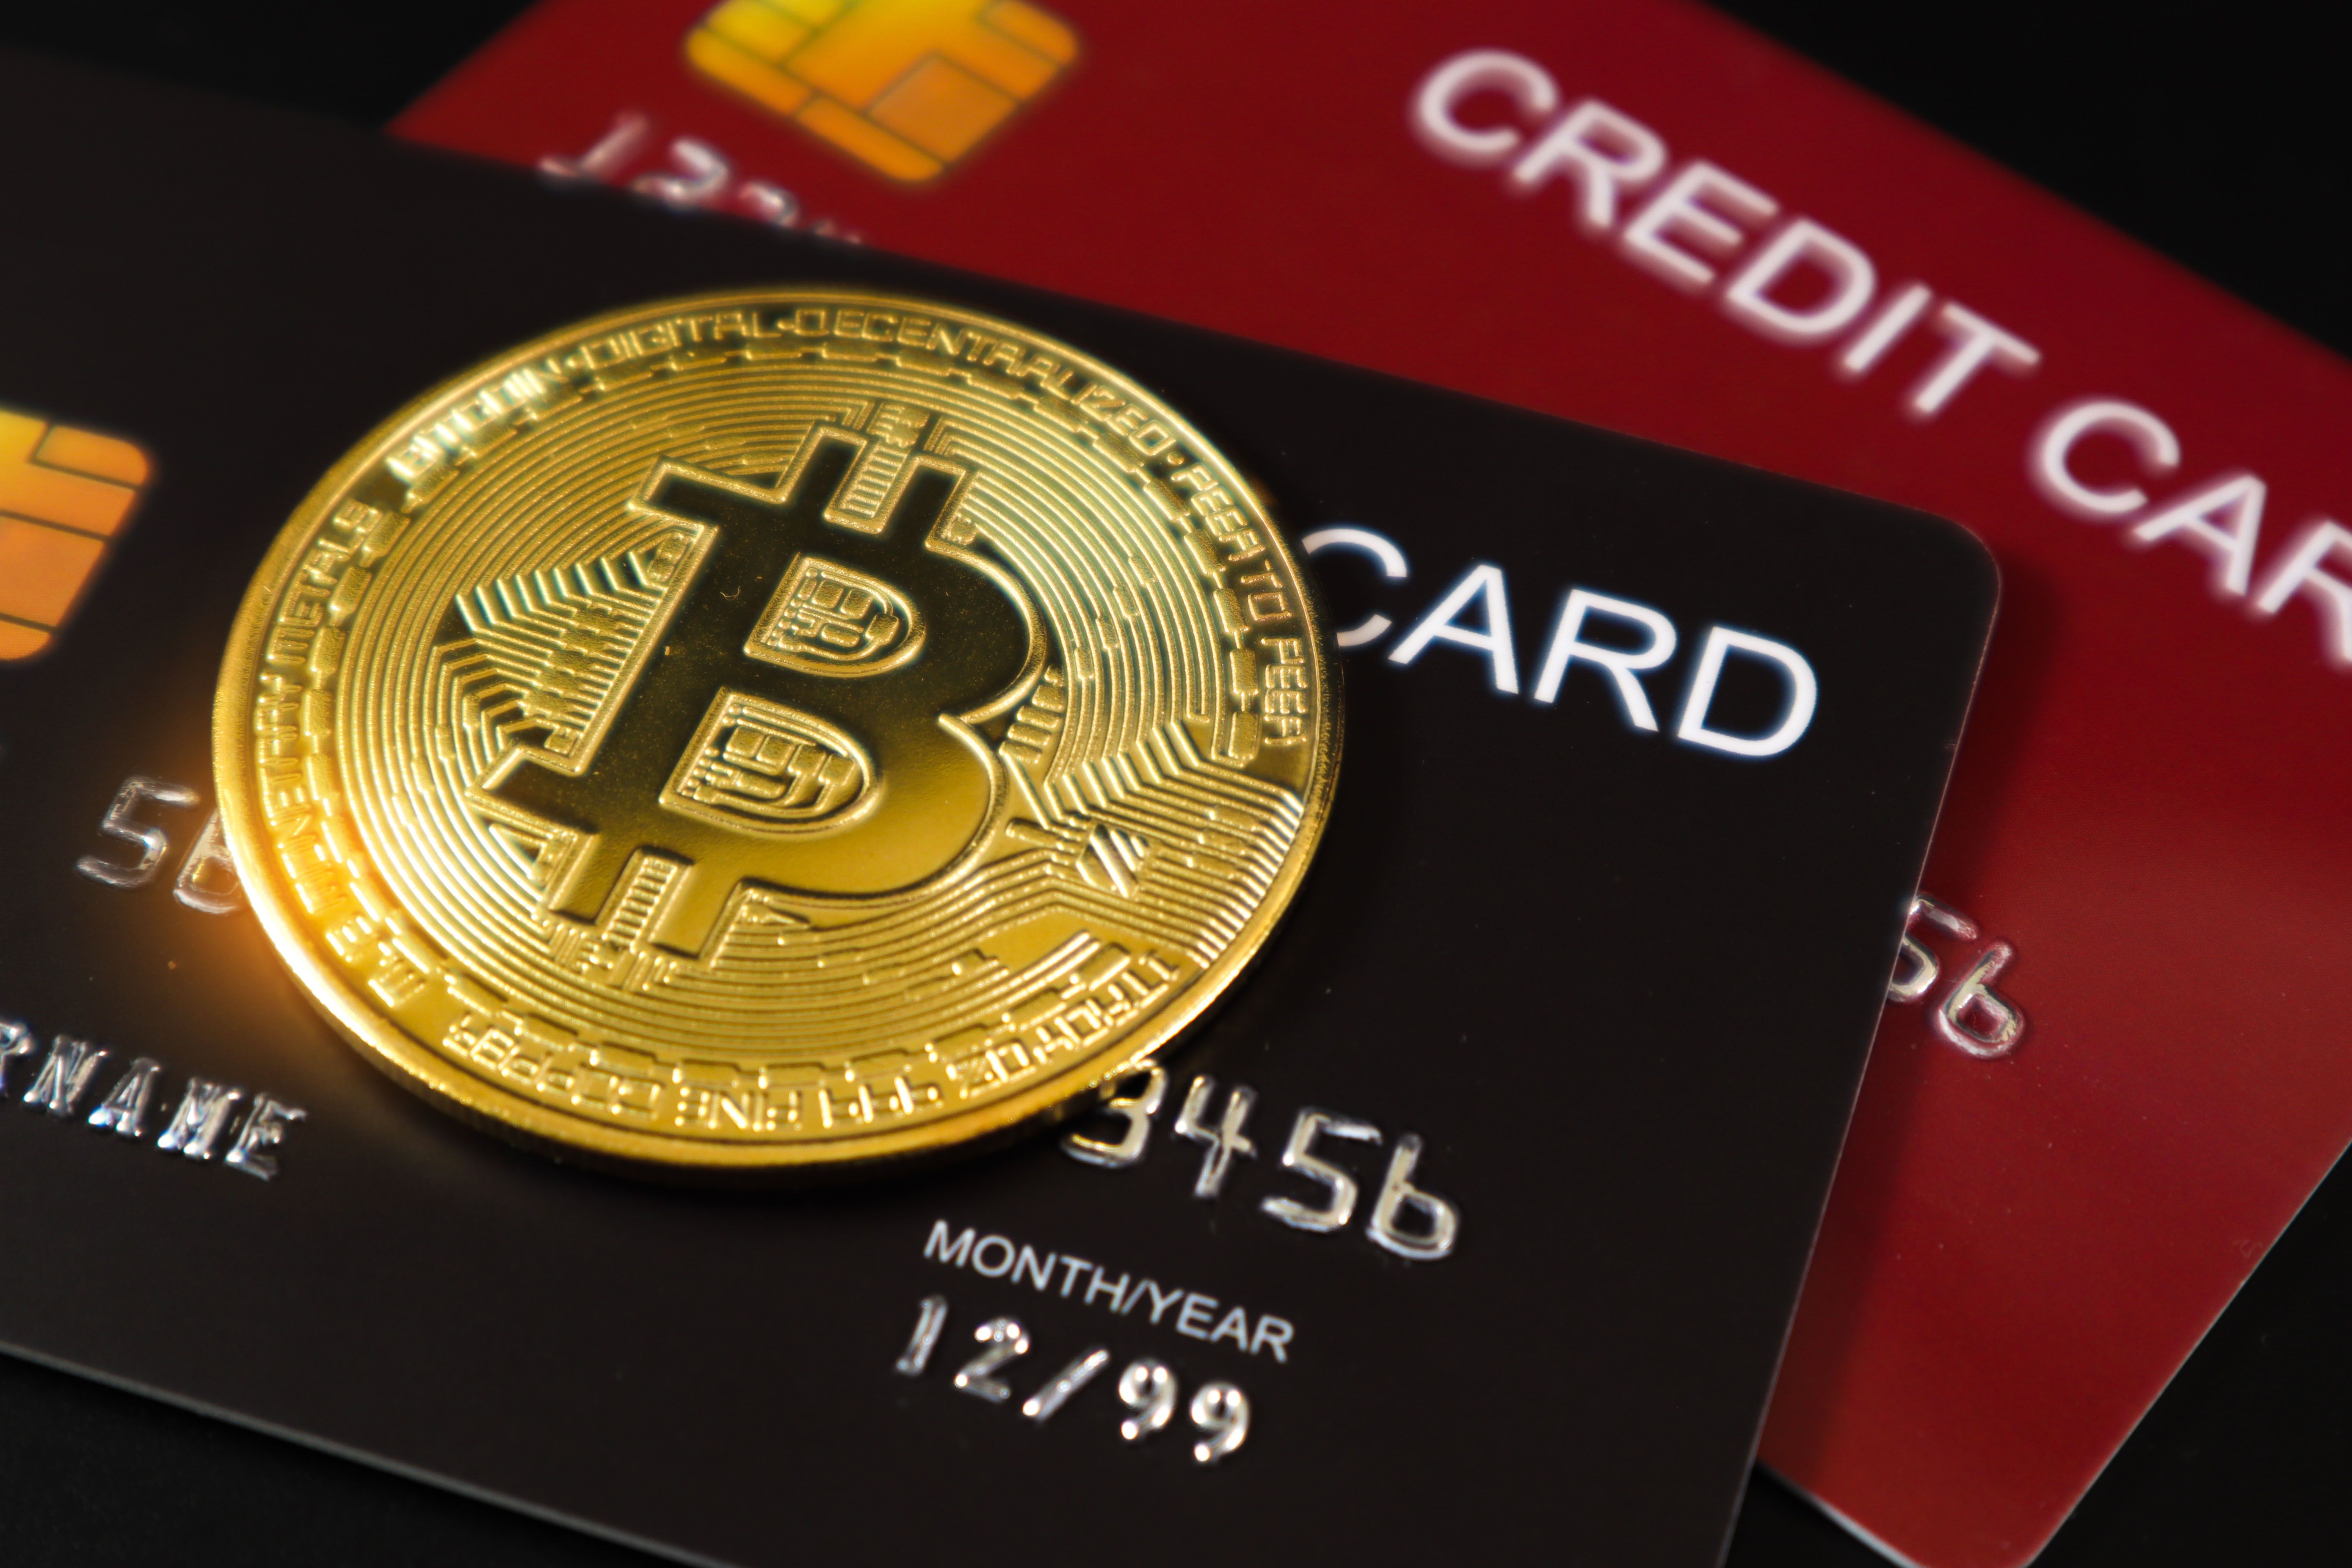 Buy Bitcoin With Credit Card - Your Top 4 Exchange Choices